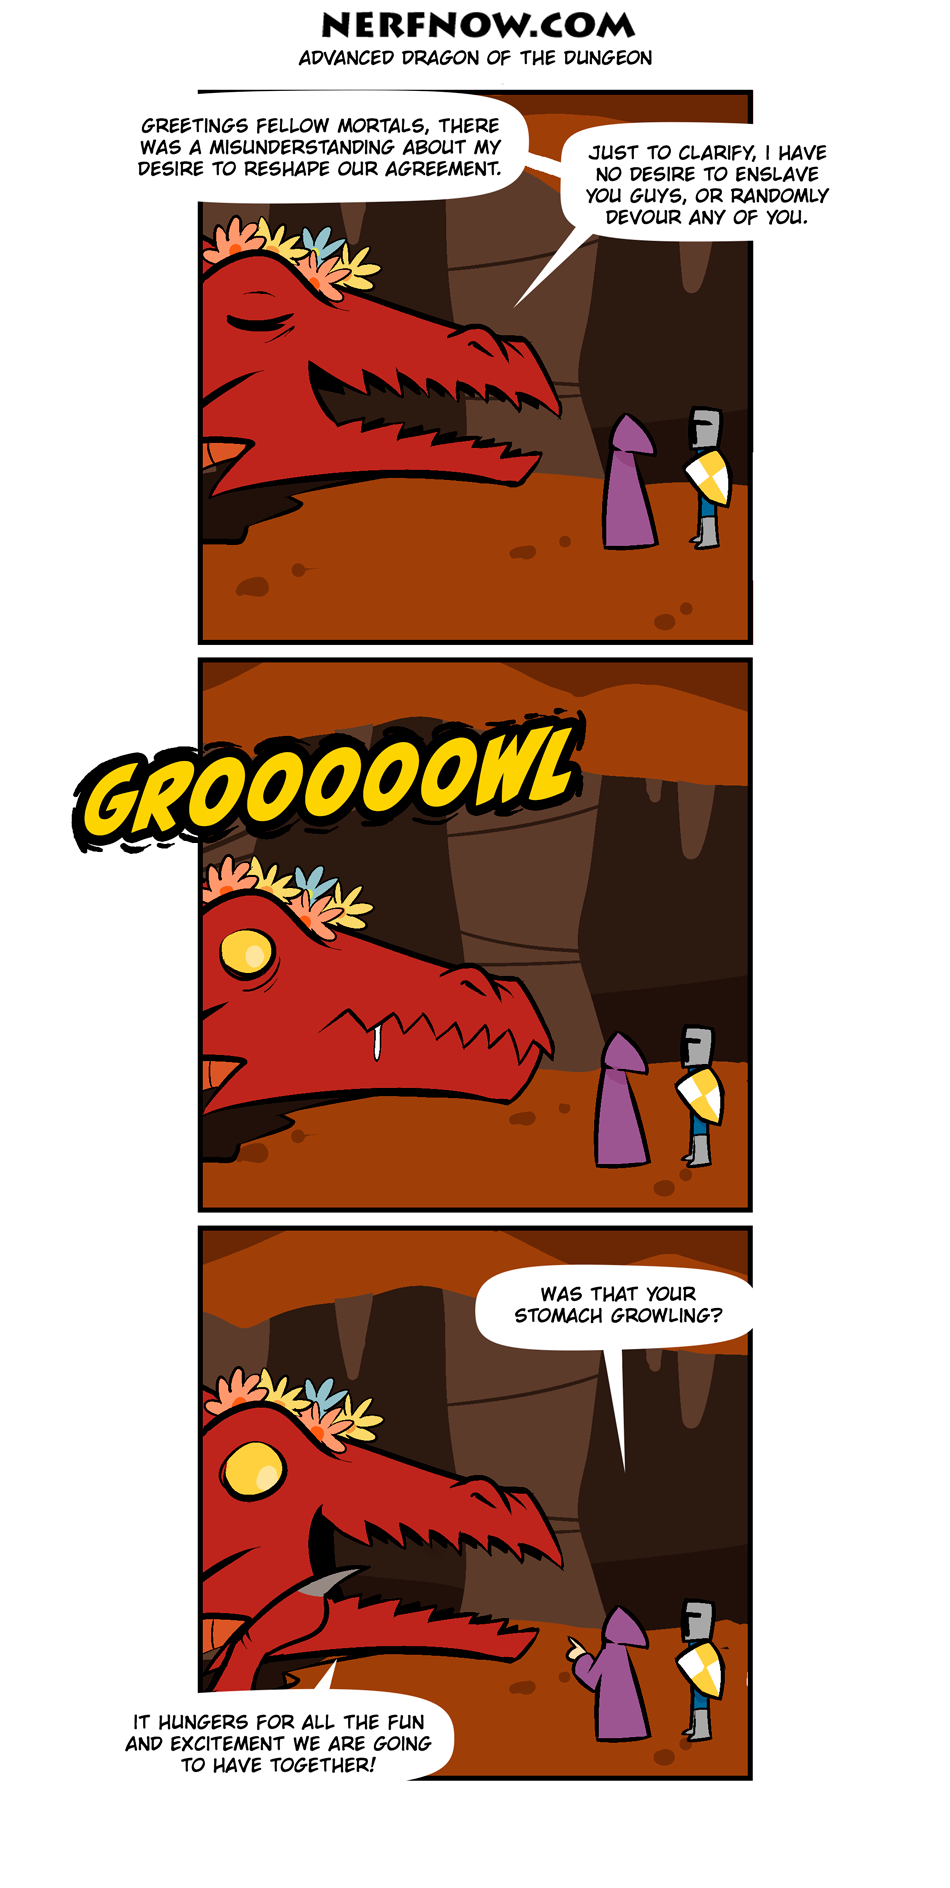 Advanced Dragon of the Dungeon